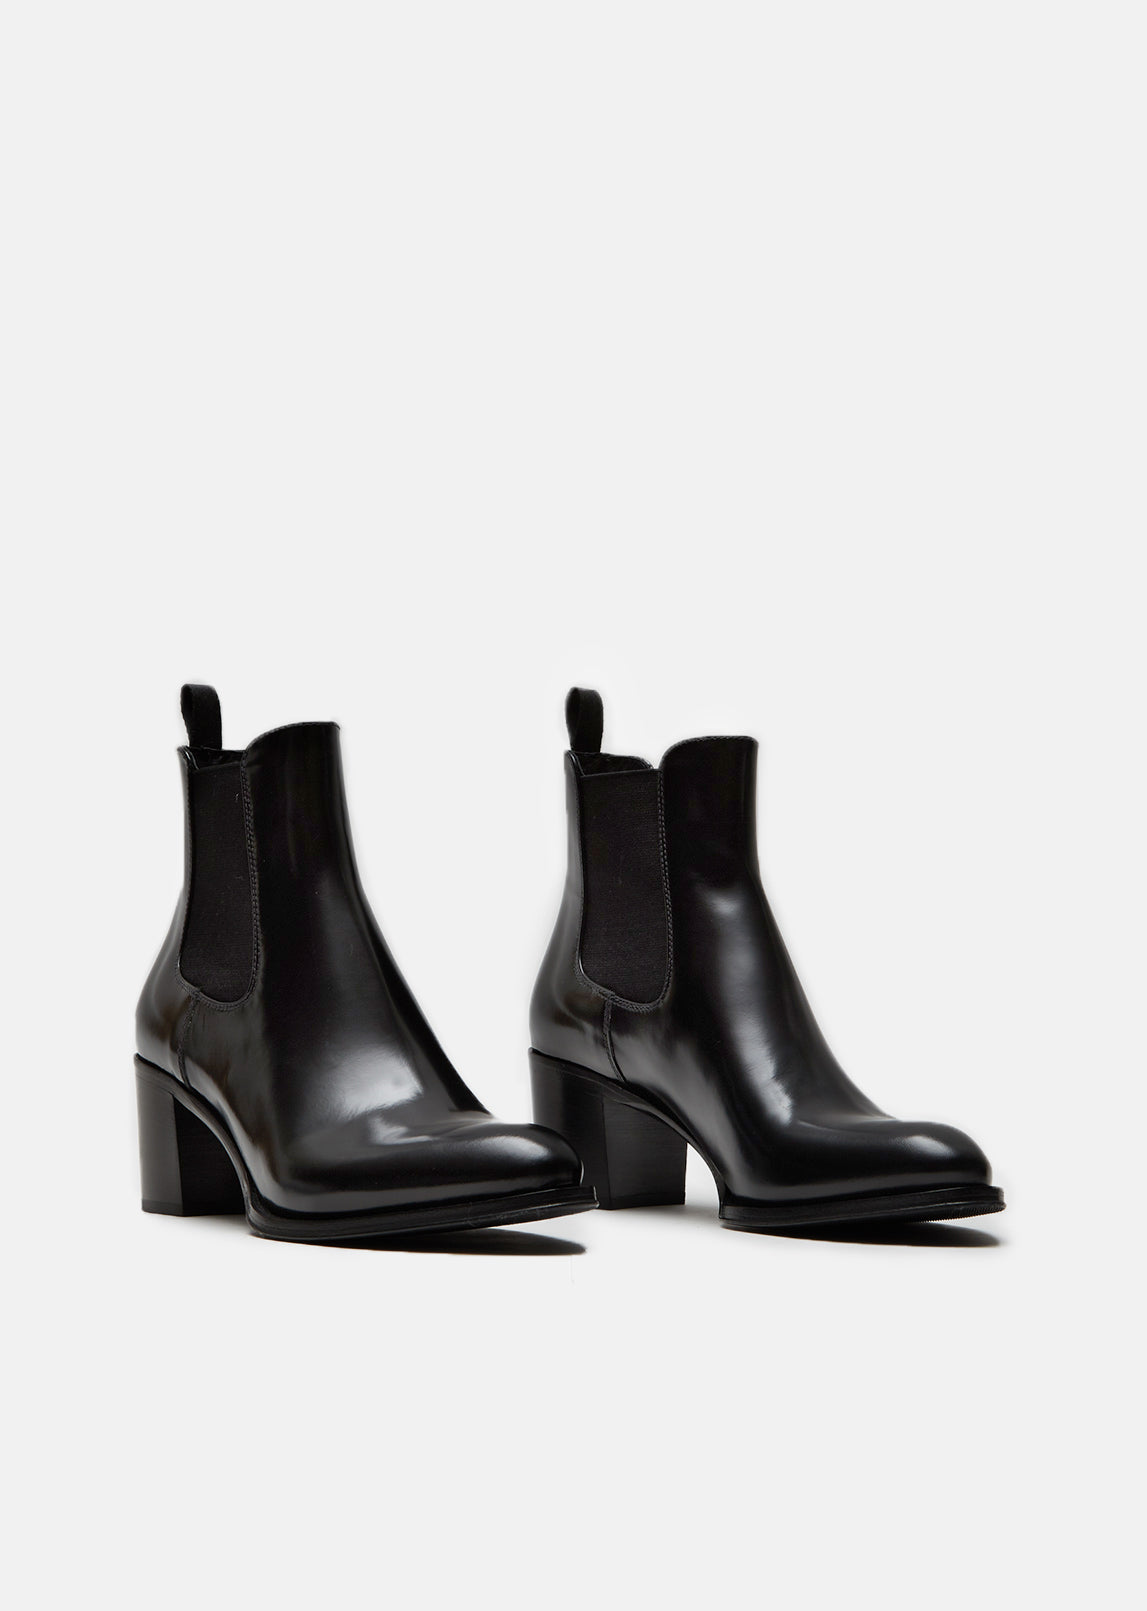 Shirley Polished Fume Ankle Boots by 